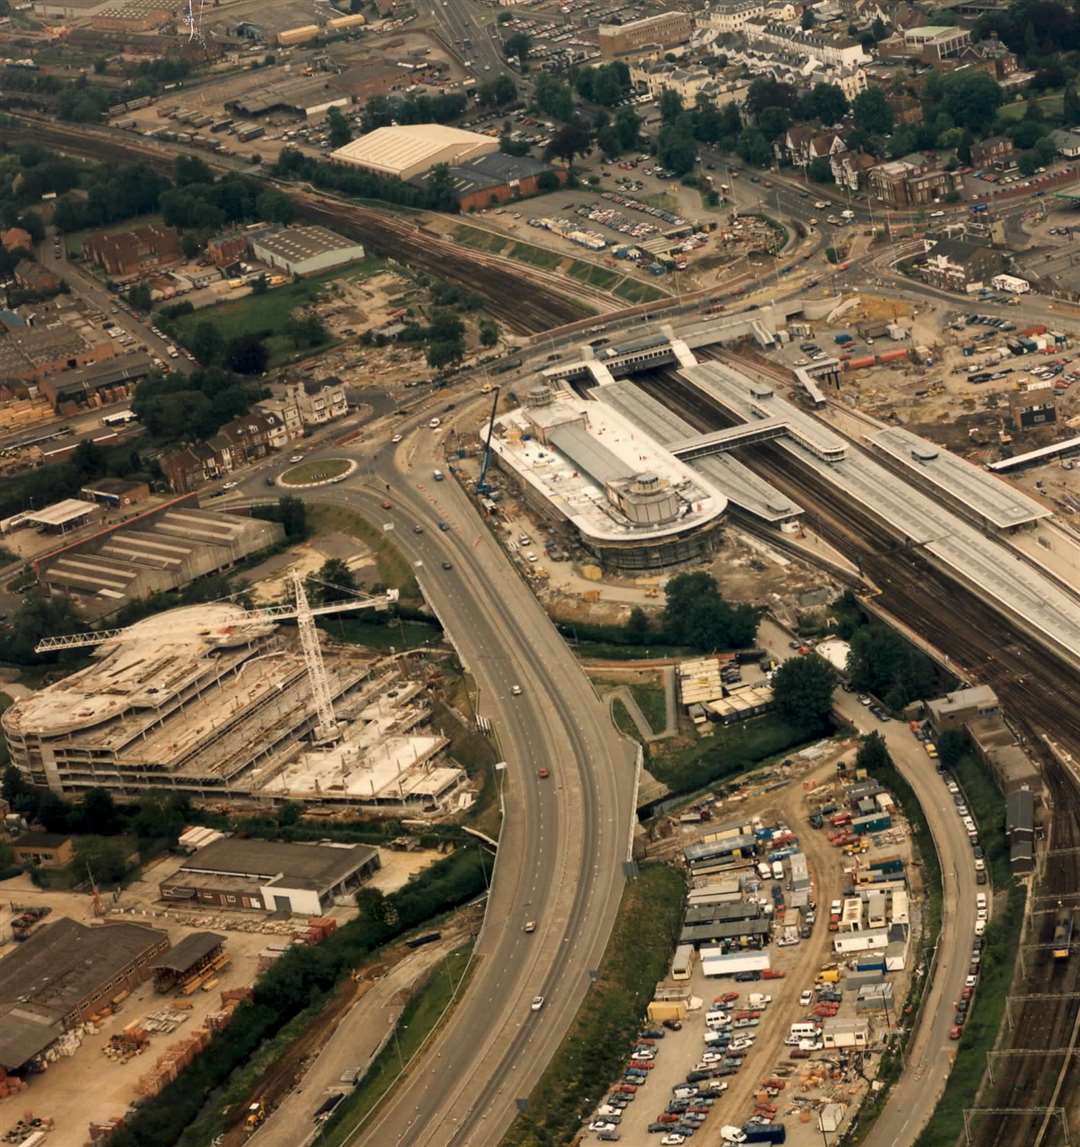 Aerial view of Ashford International train station under construction in 1995. The picture shows the changing face of Ashford, with the surrounding area now boasting a new college, brewery, Aldi supermarket and under-construction hotel.